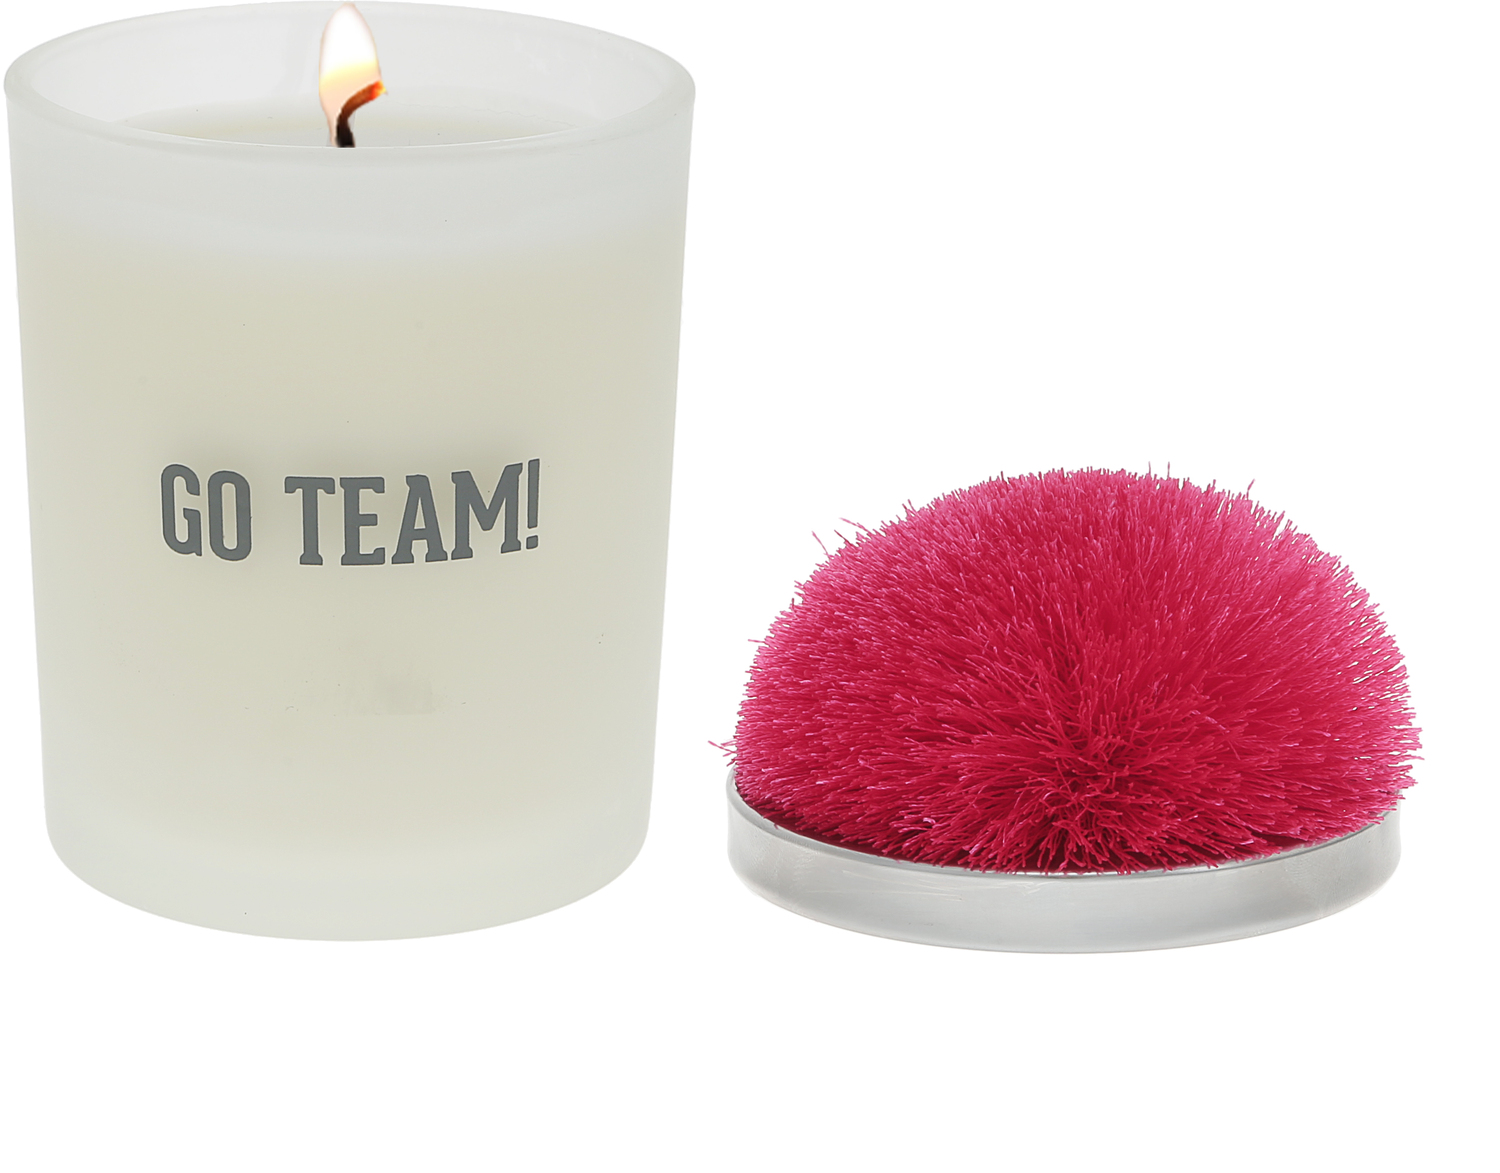 Go Team! - Hot Pink by Repre-Scent - Go Team! - Hot Pink - 5.5 oz - 100% Soy Wax Candle with Pom Pom Lid
Scent: Tranquility